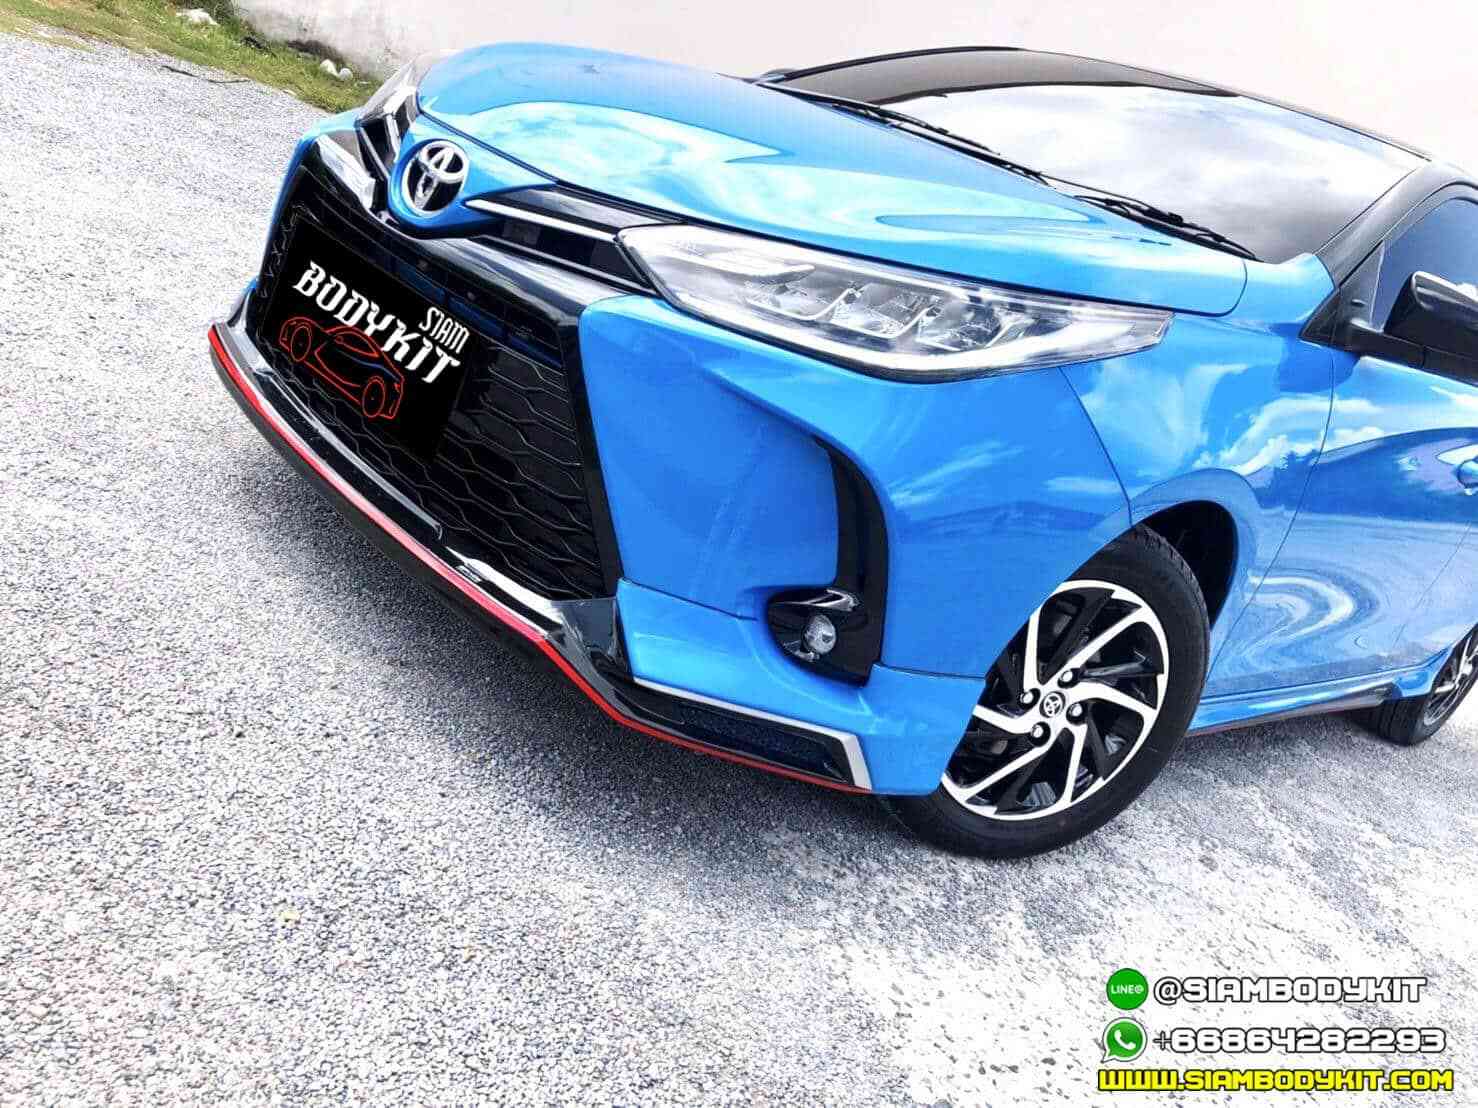 Space Bodykit for Toyota Yaris Hatchback 2020-2021 (COLOR)